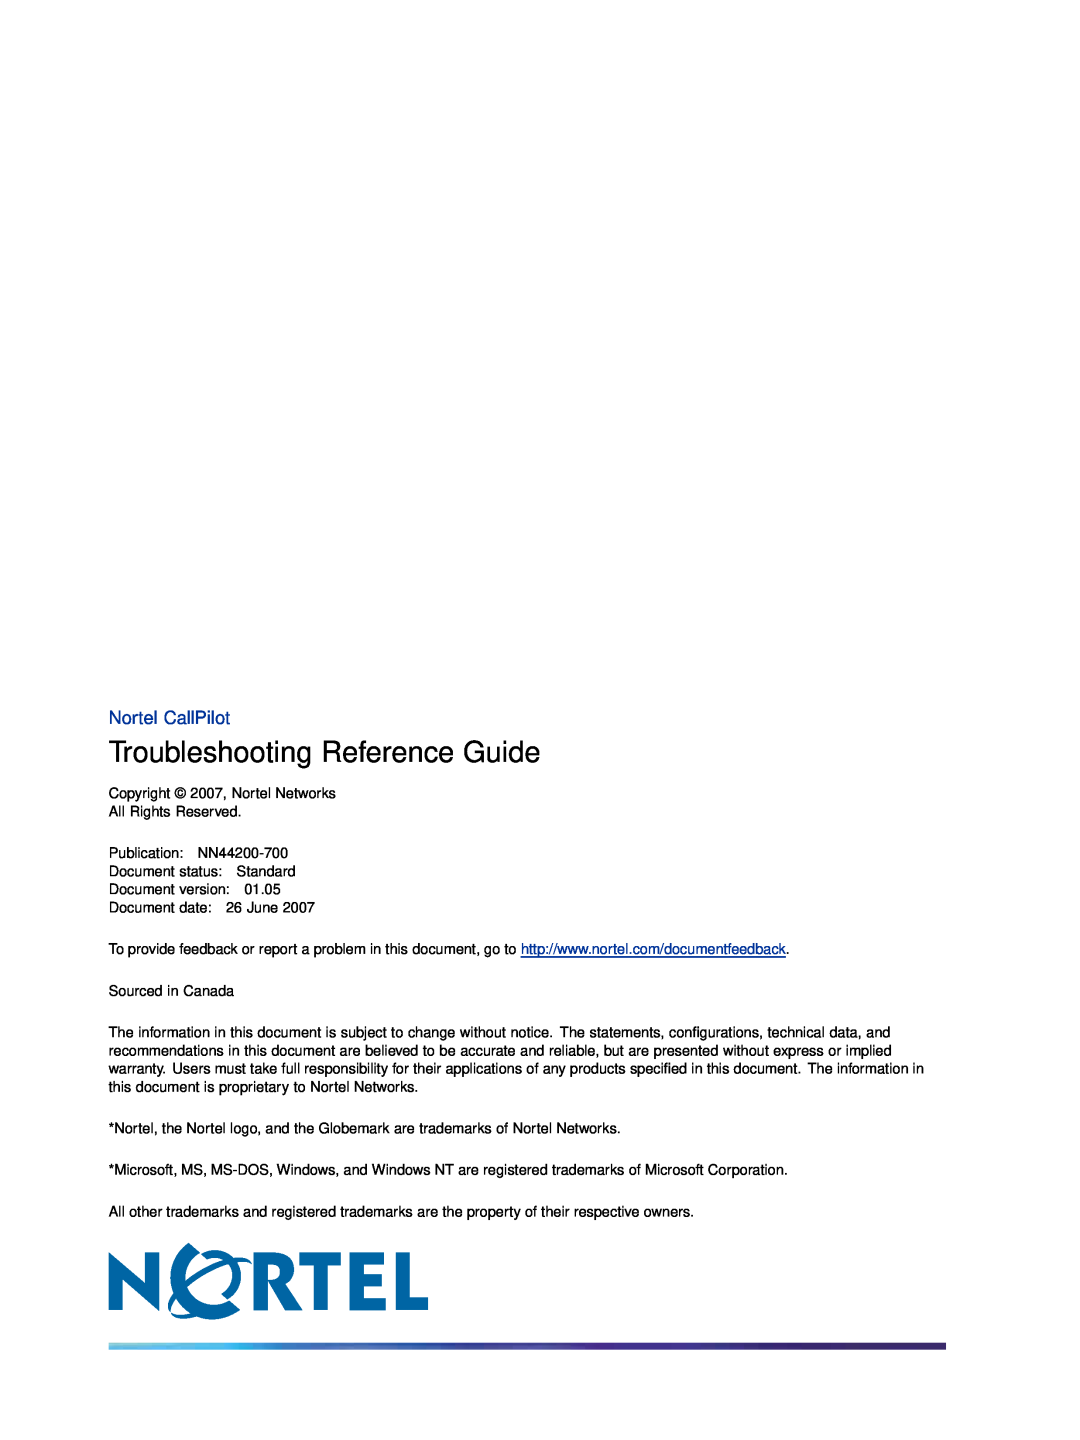 Nortel Networks NN44200-700 manual Troubleshooting Reference Guide, Nortel CallPilot 